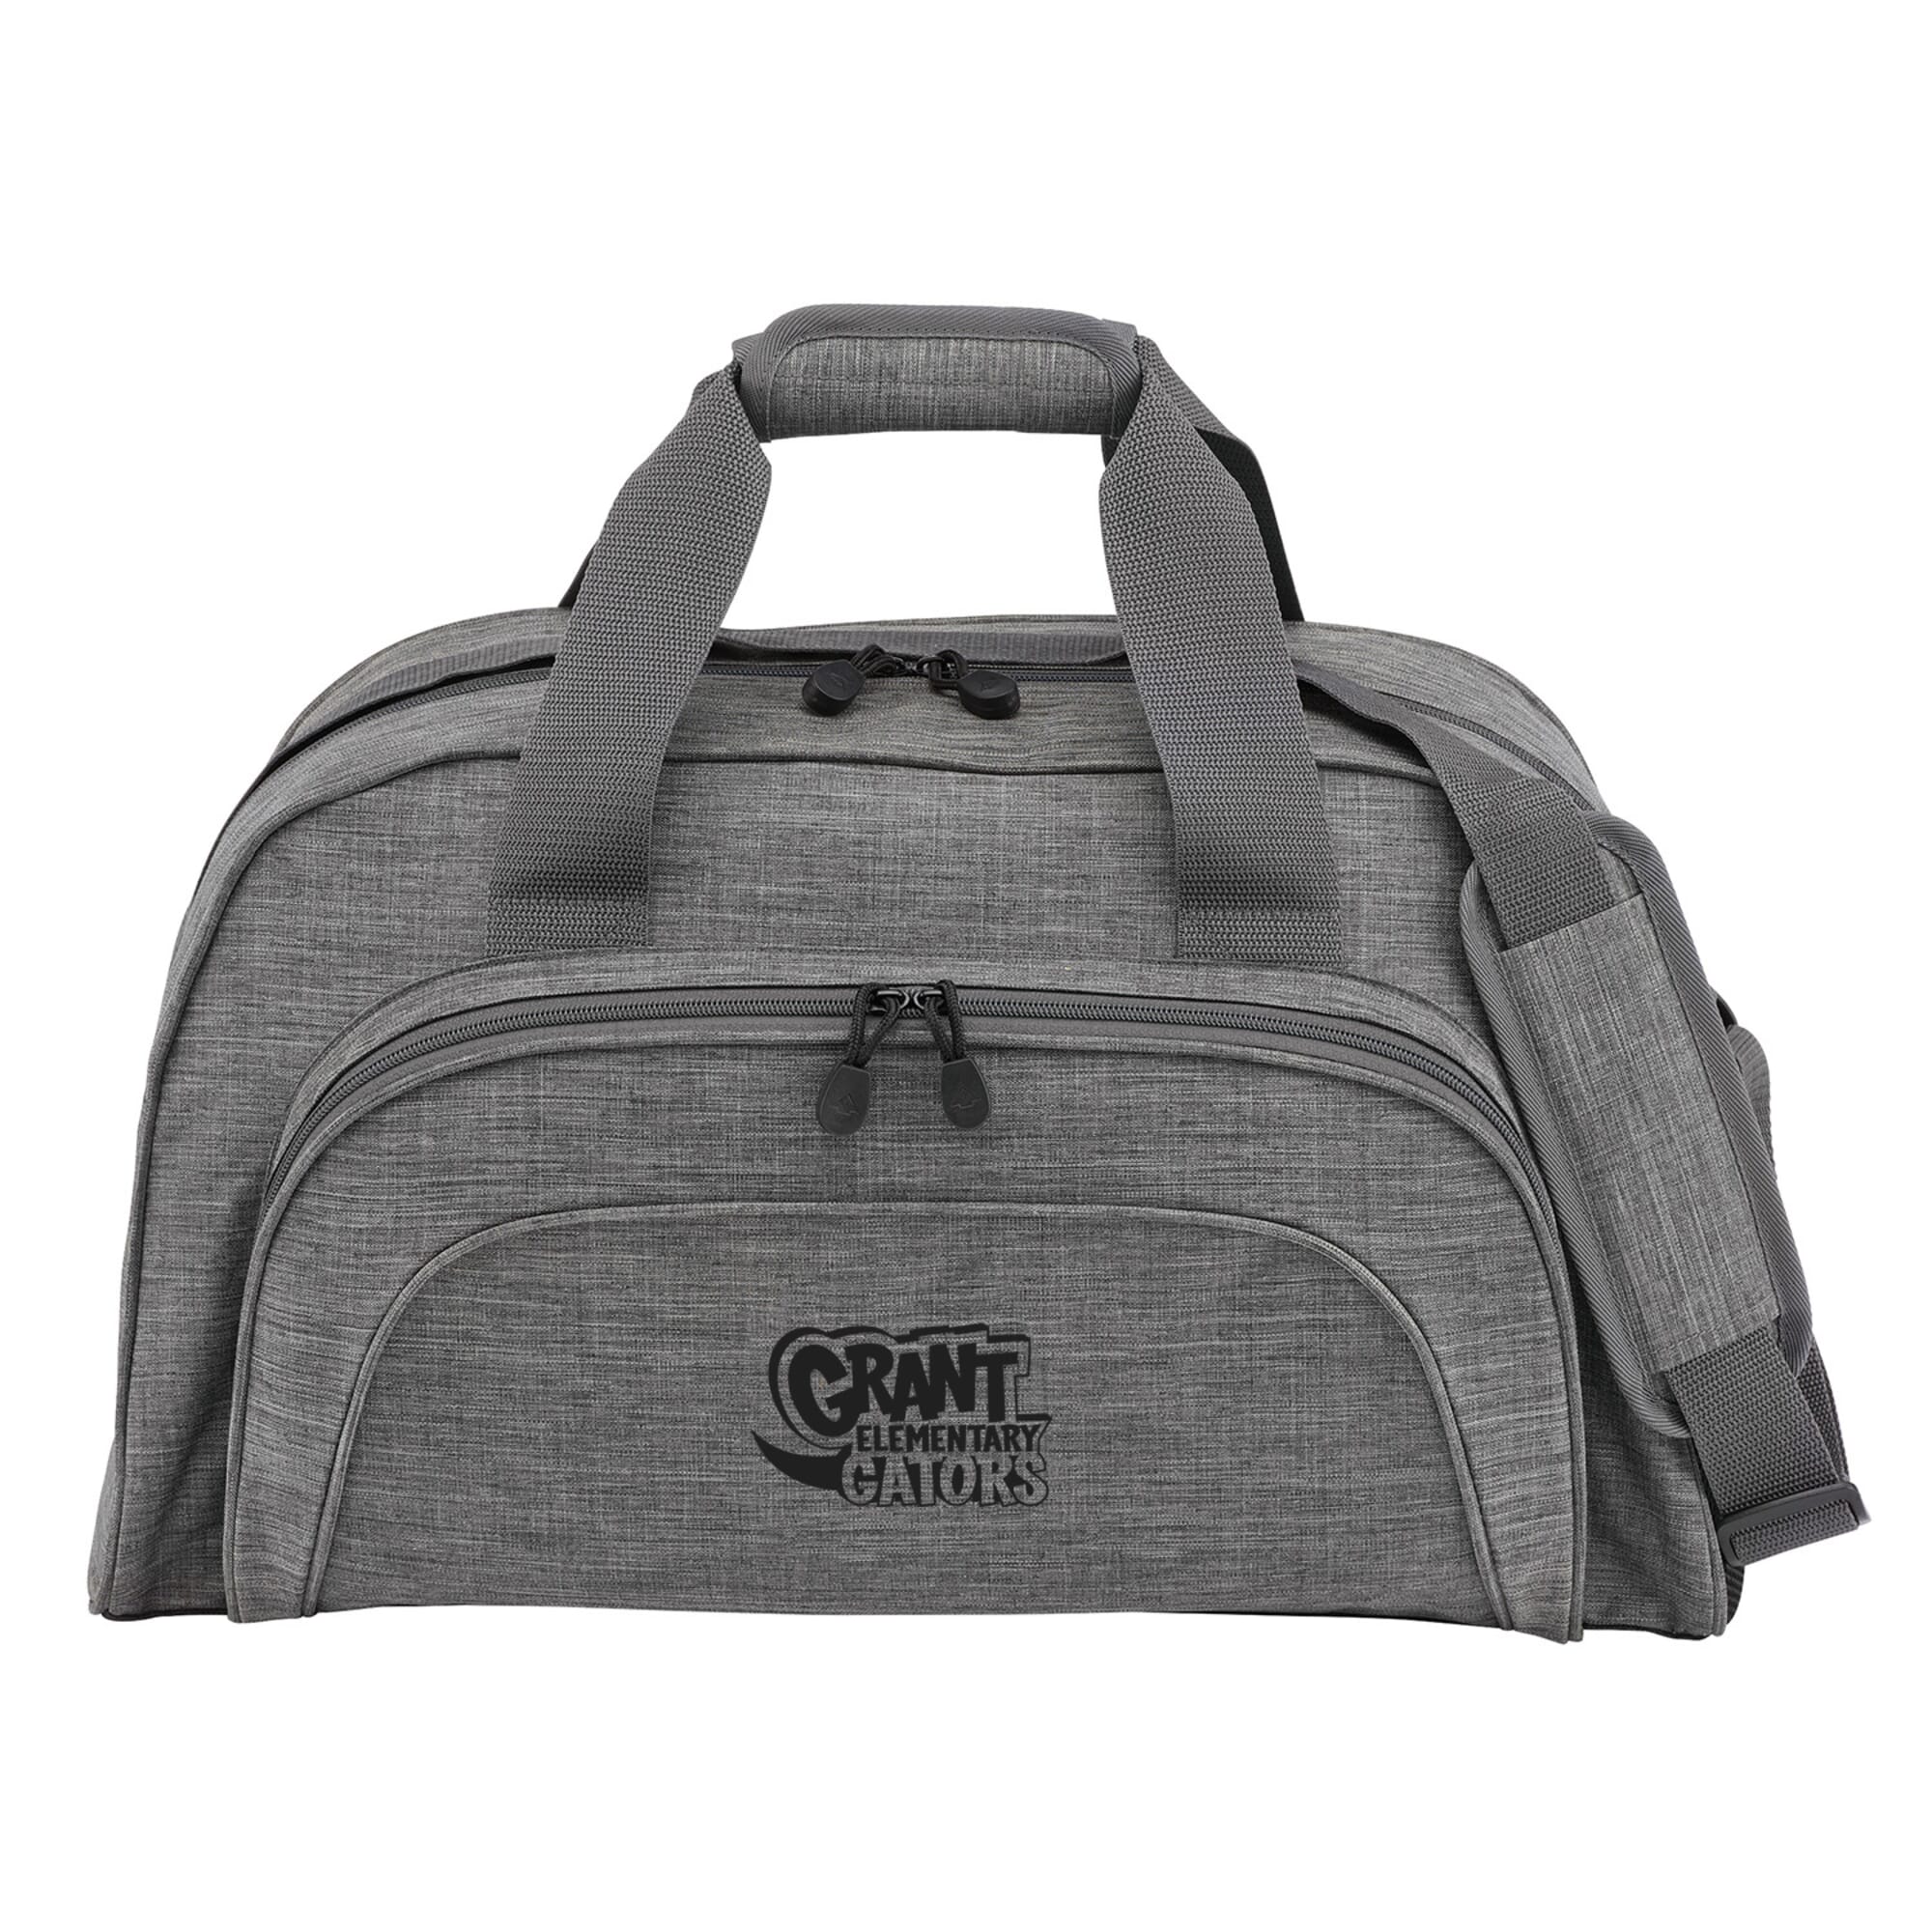 Elite Clubhouse Duffle